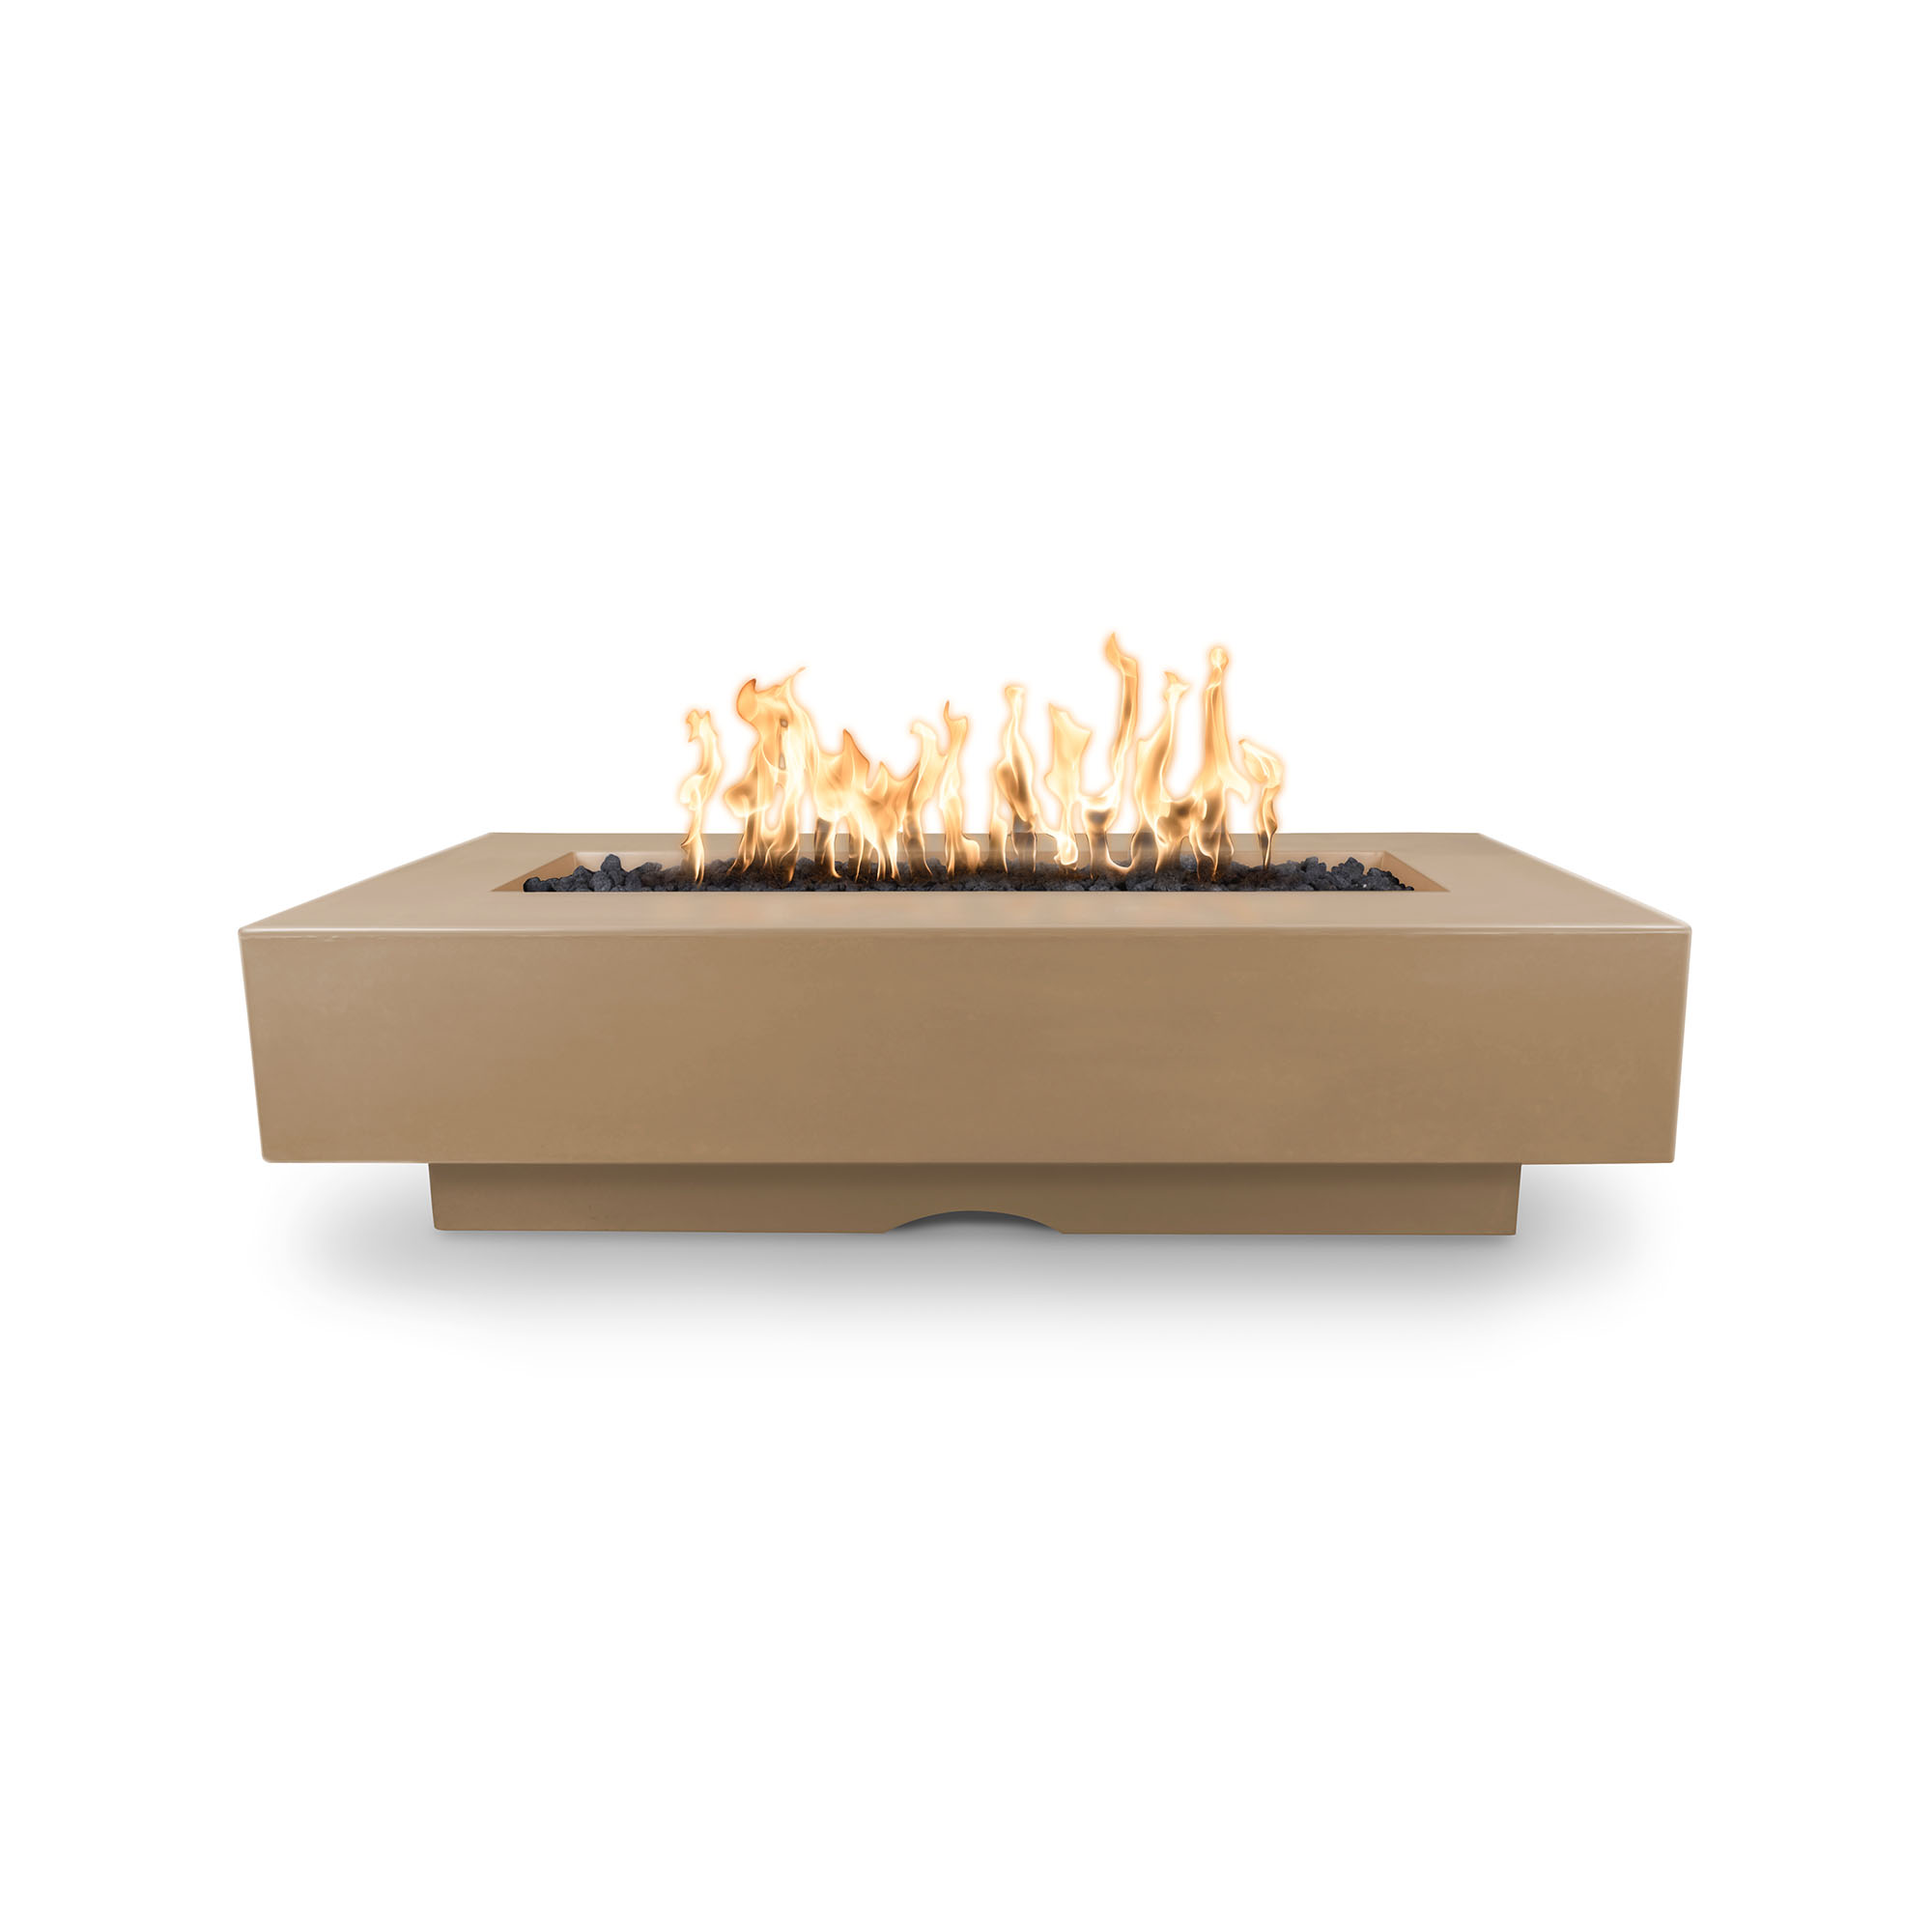 Del Mar Outdoor Fire Pit - 84 Inches